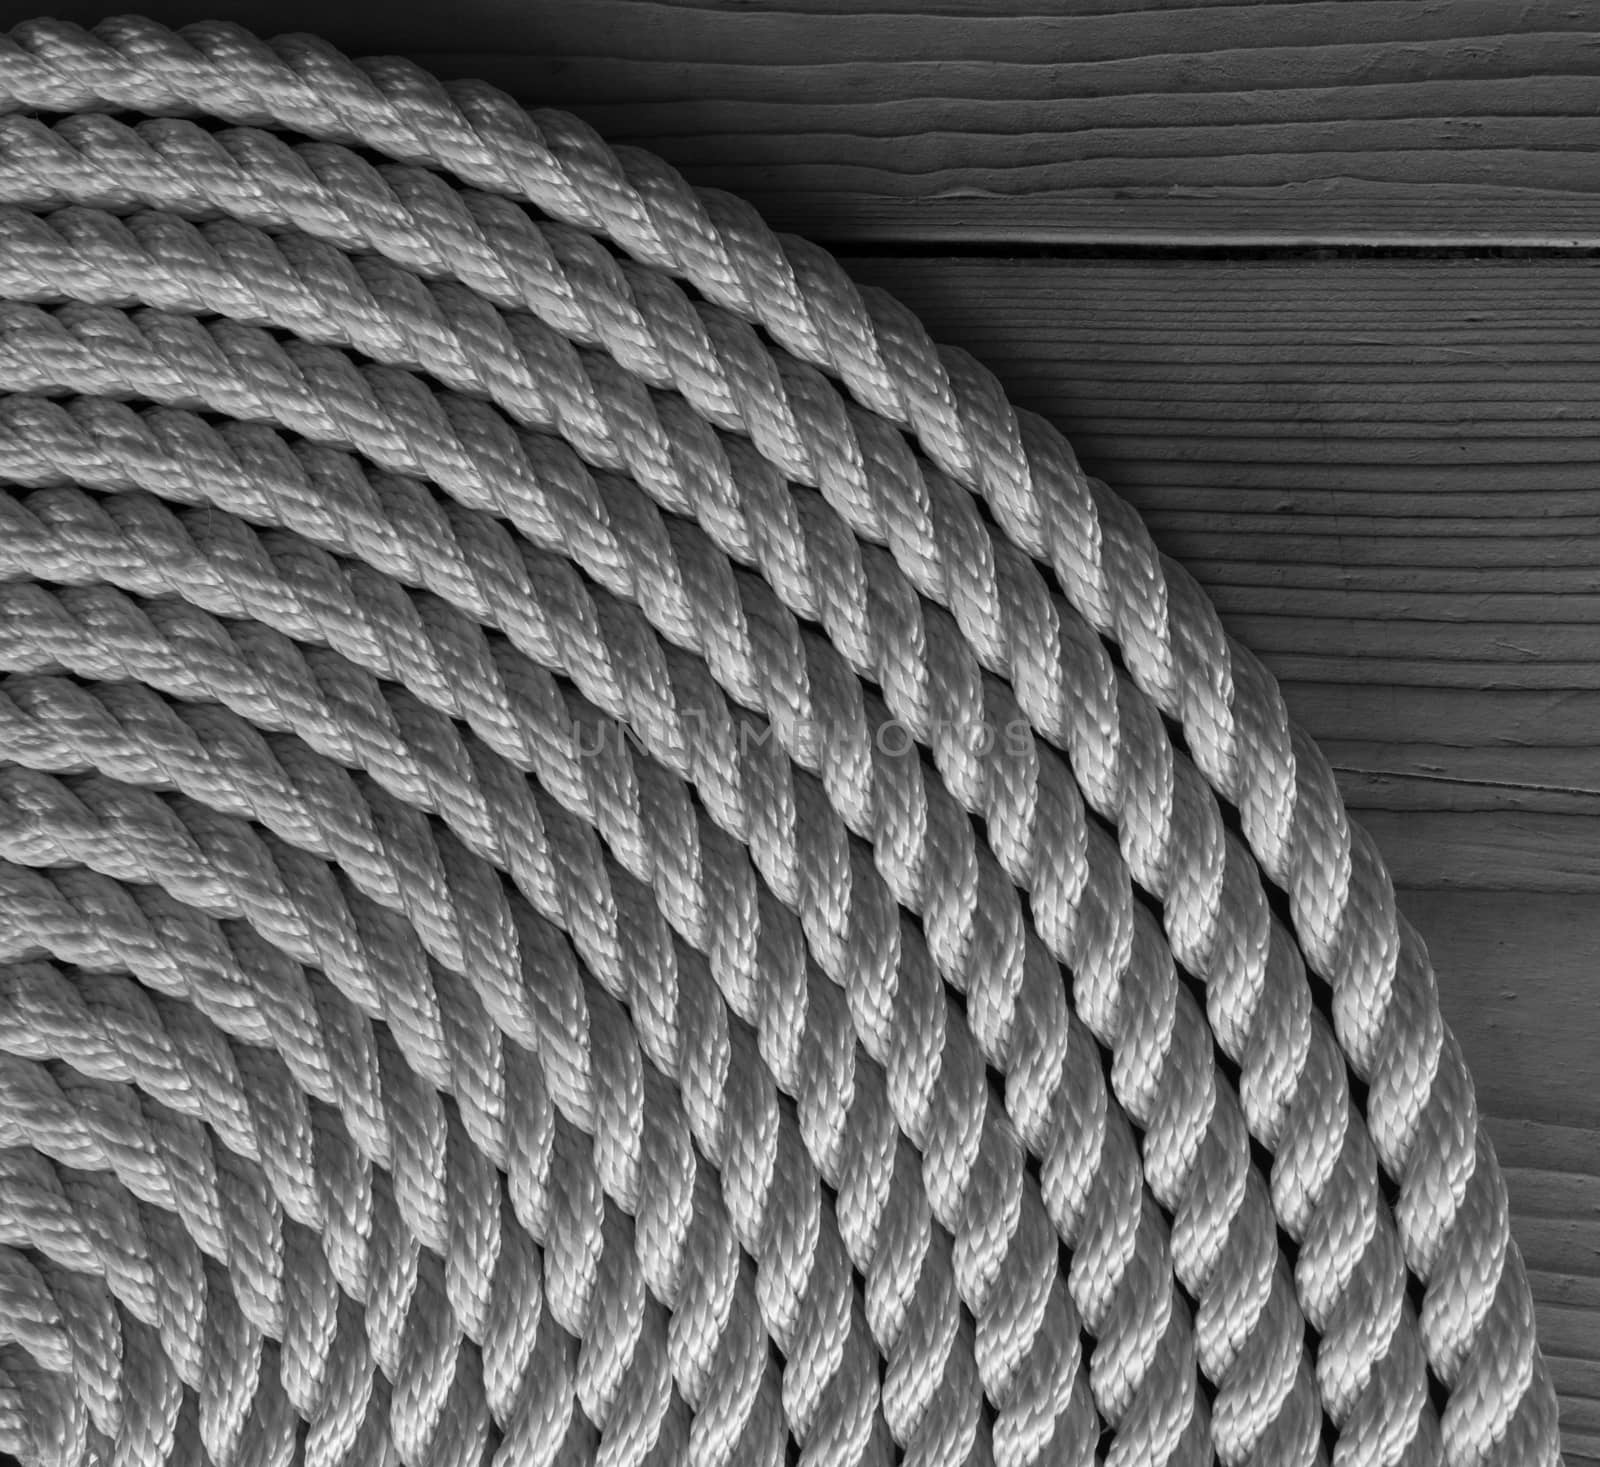 Rope Coil black and white by radzonimo